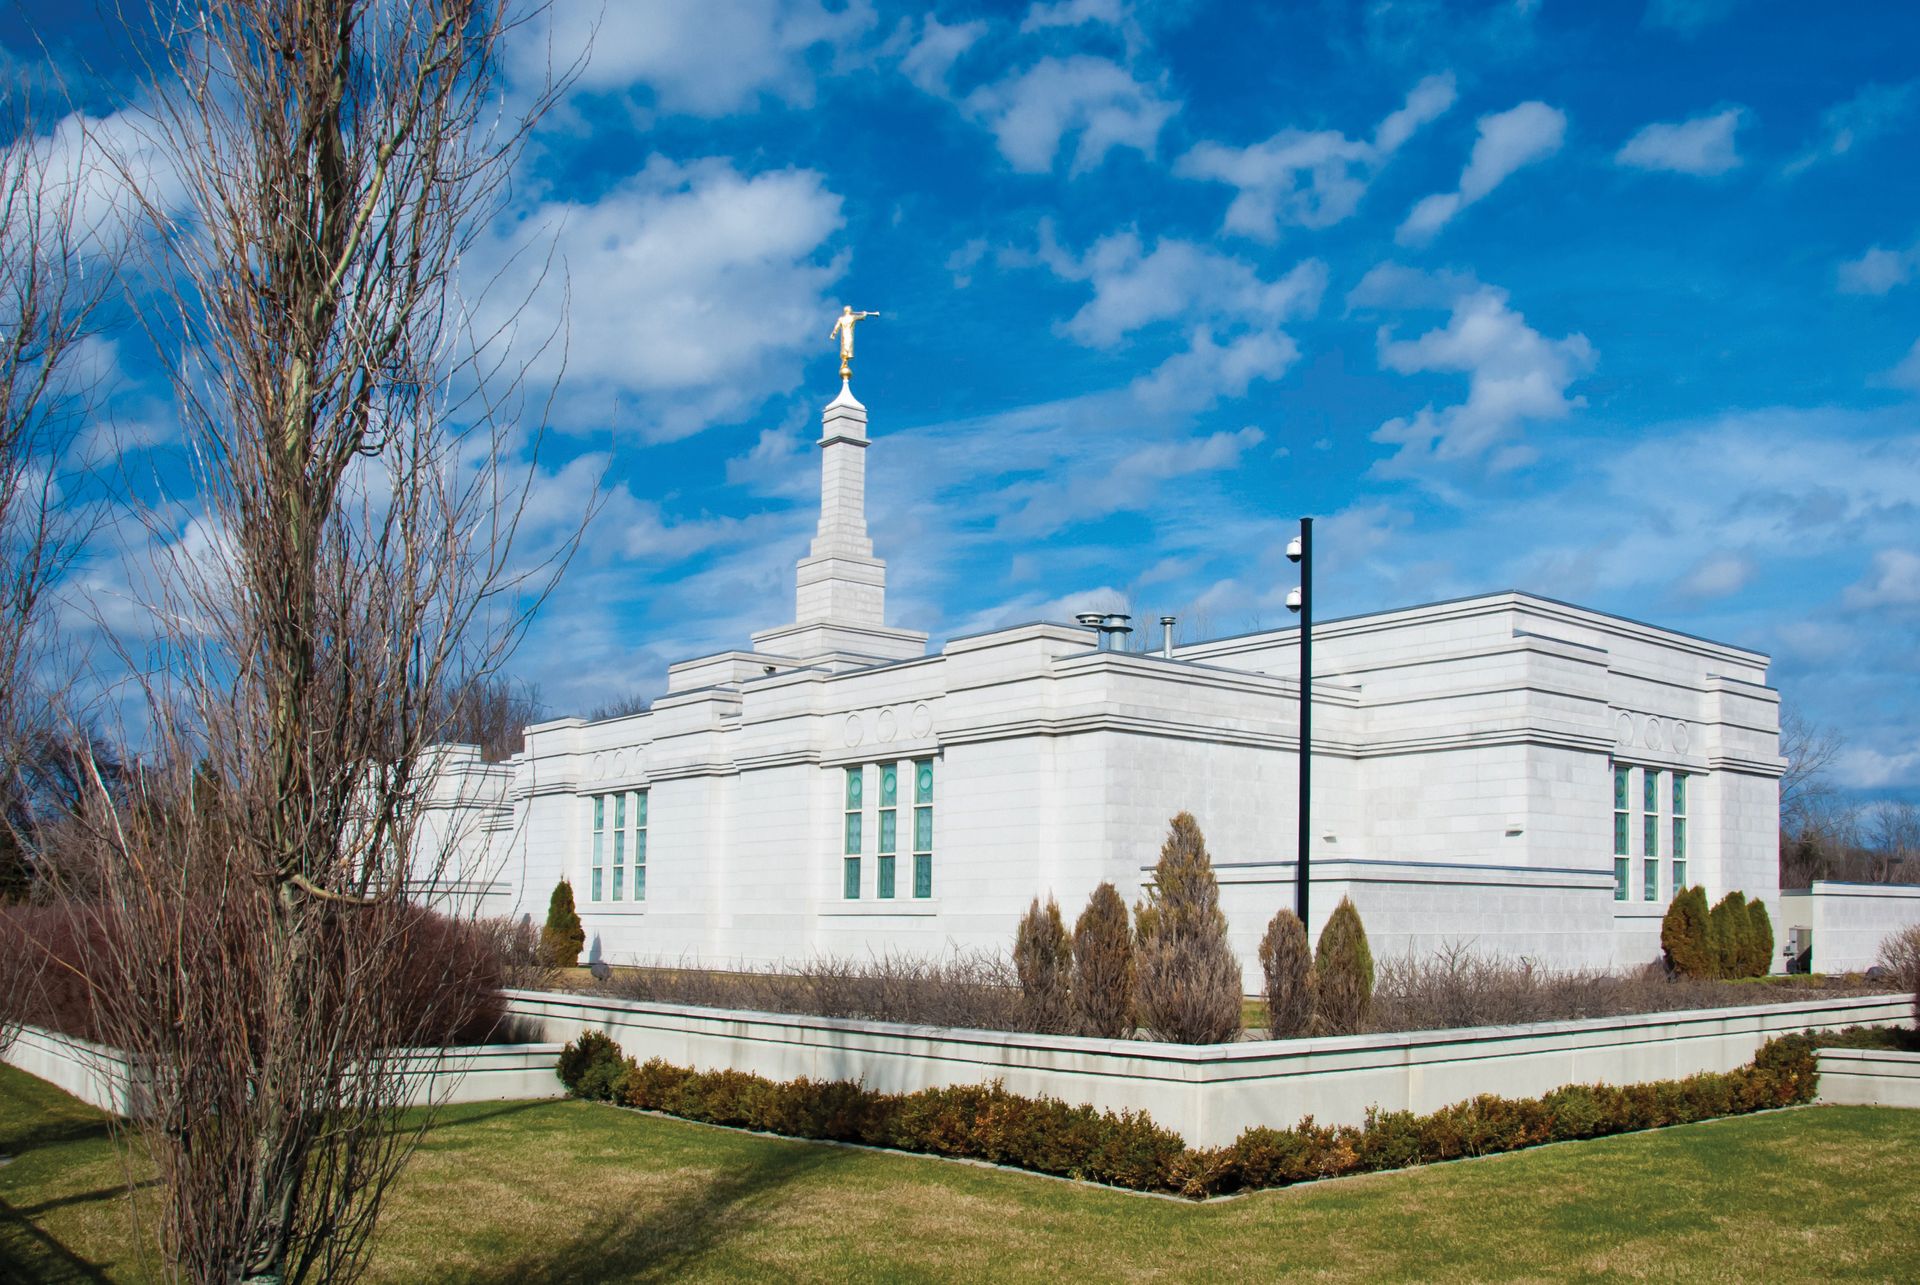 A side view of the Montreal Quebec Temple, including scenery.